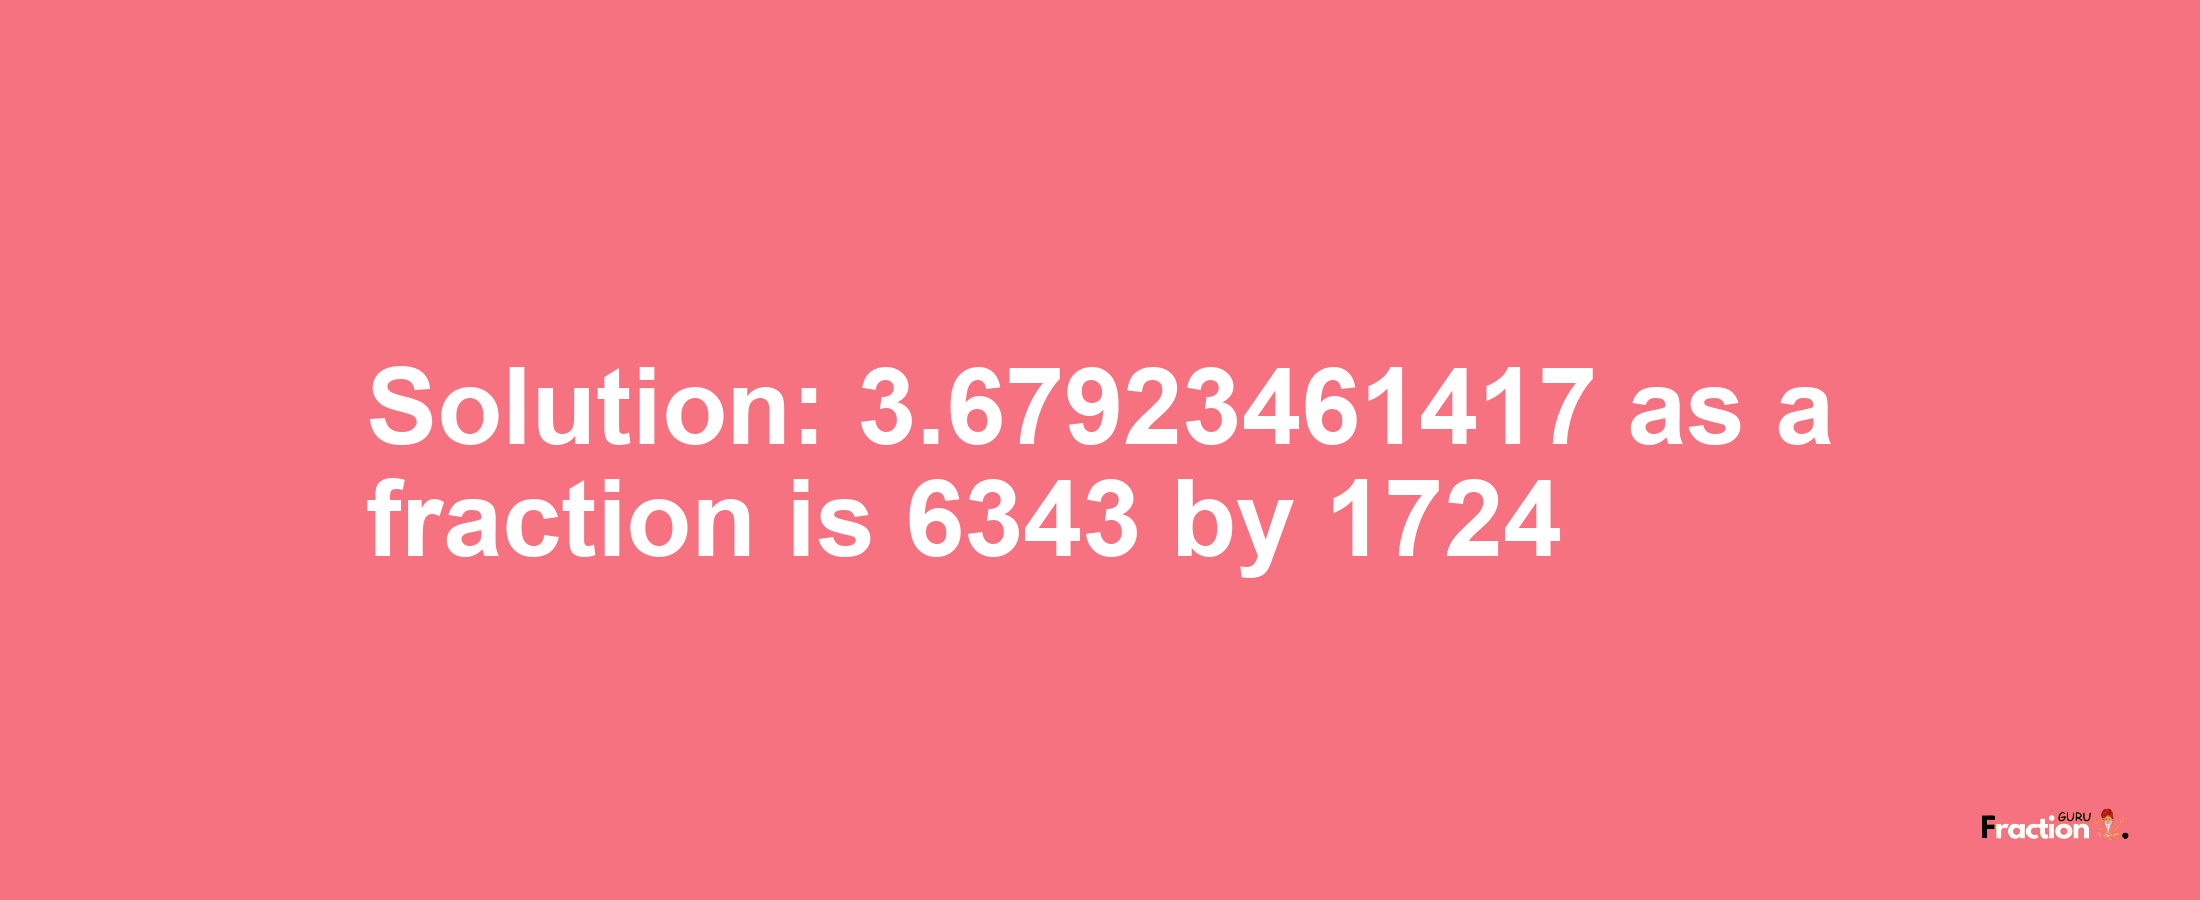 Solution:3.67923461417 as a fraction is 6343/1724